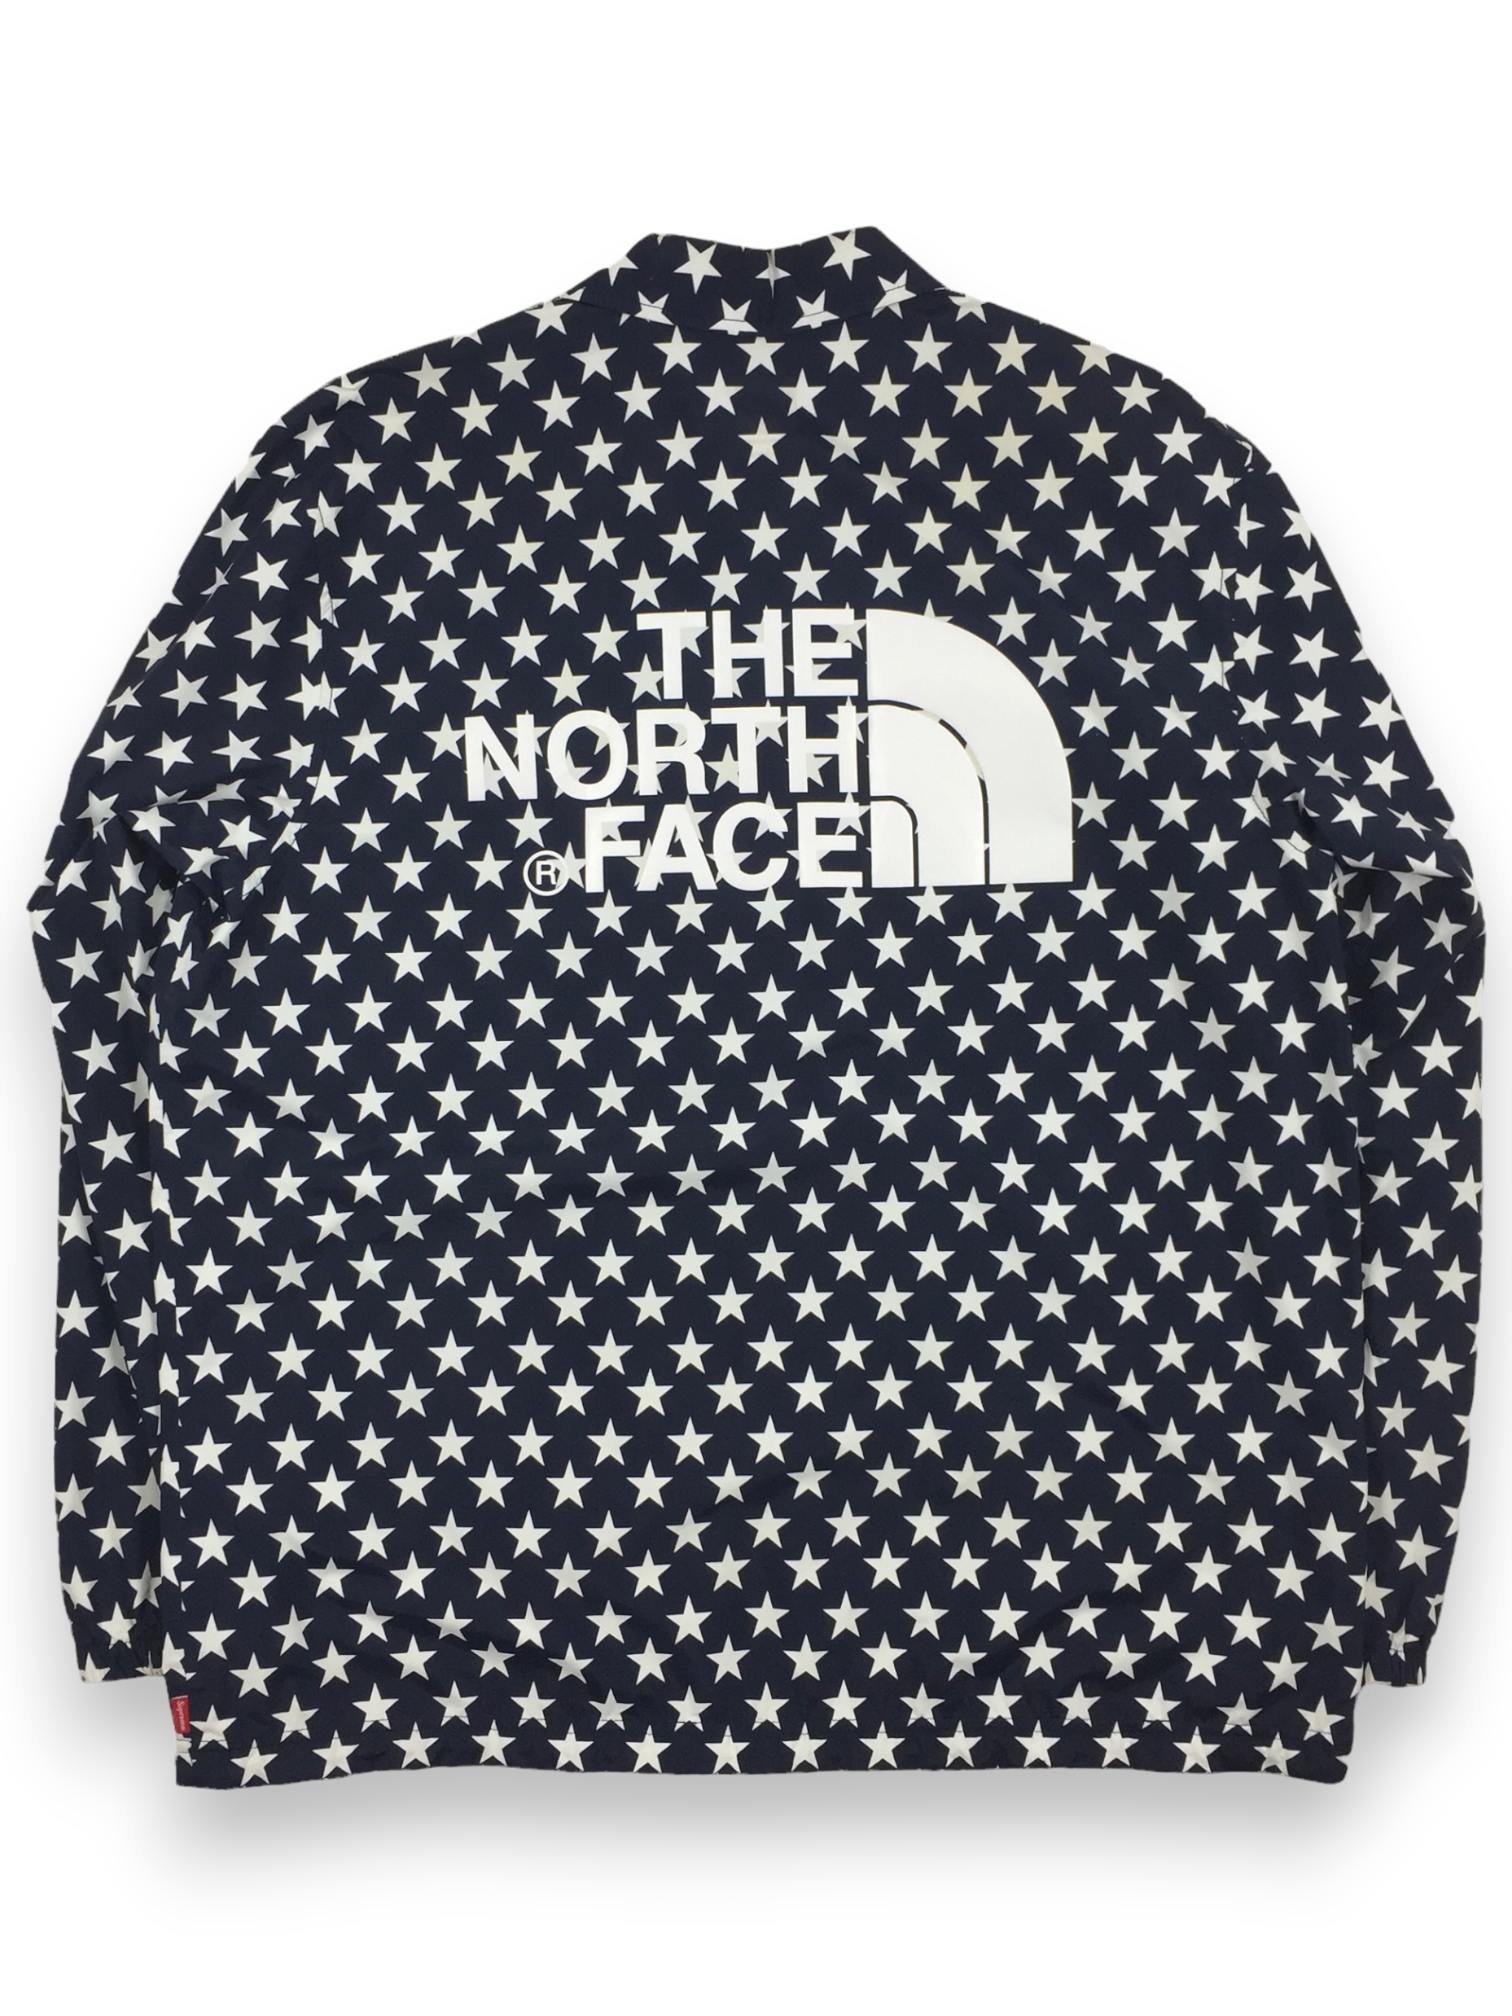 2015 Supreme x The North Face Packable Navy Stars Coach